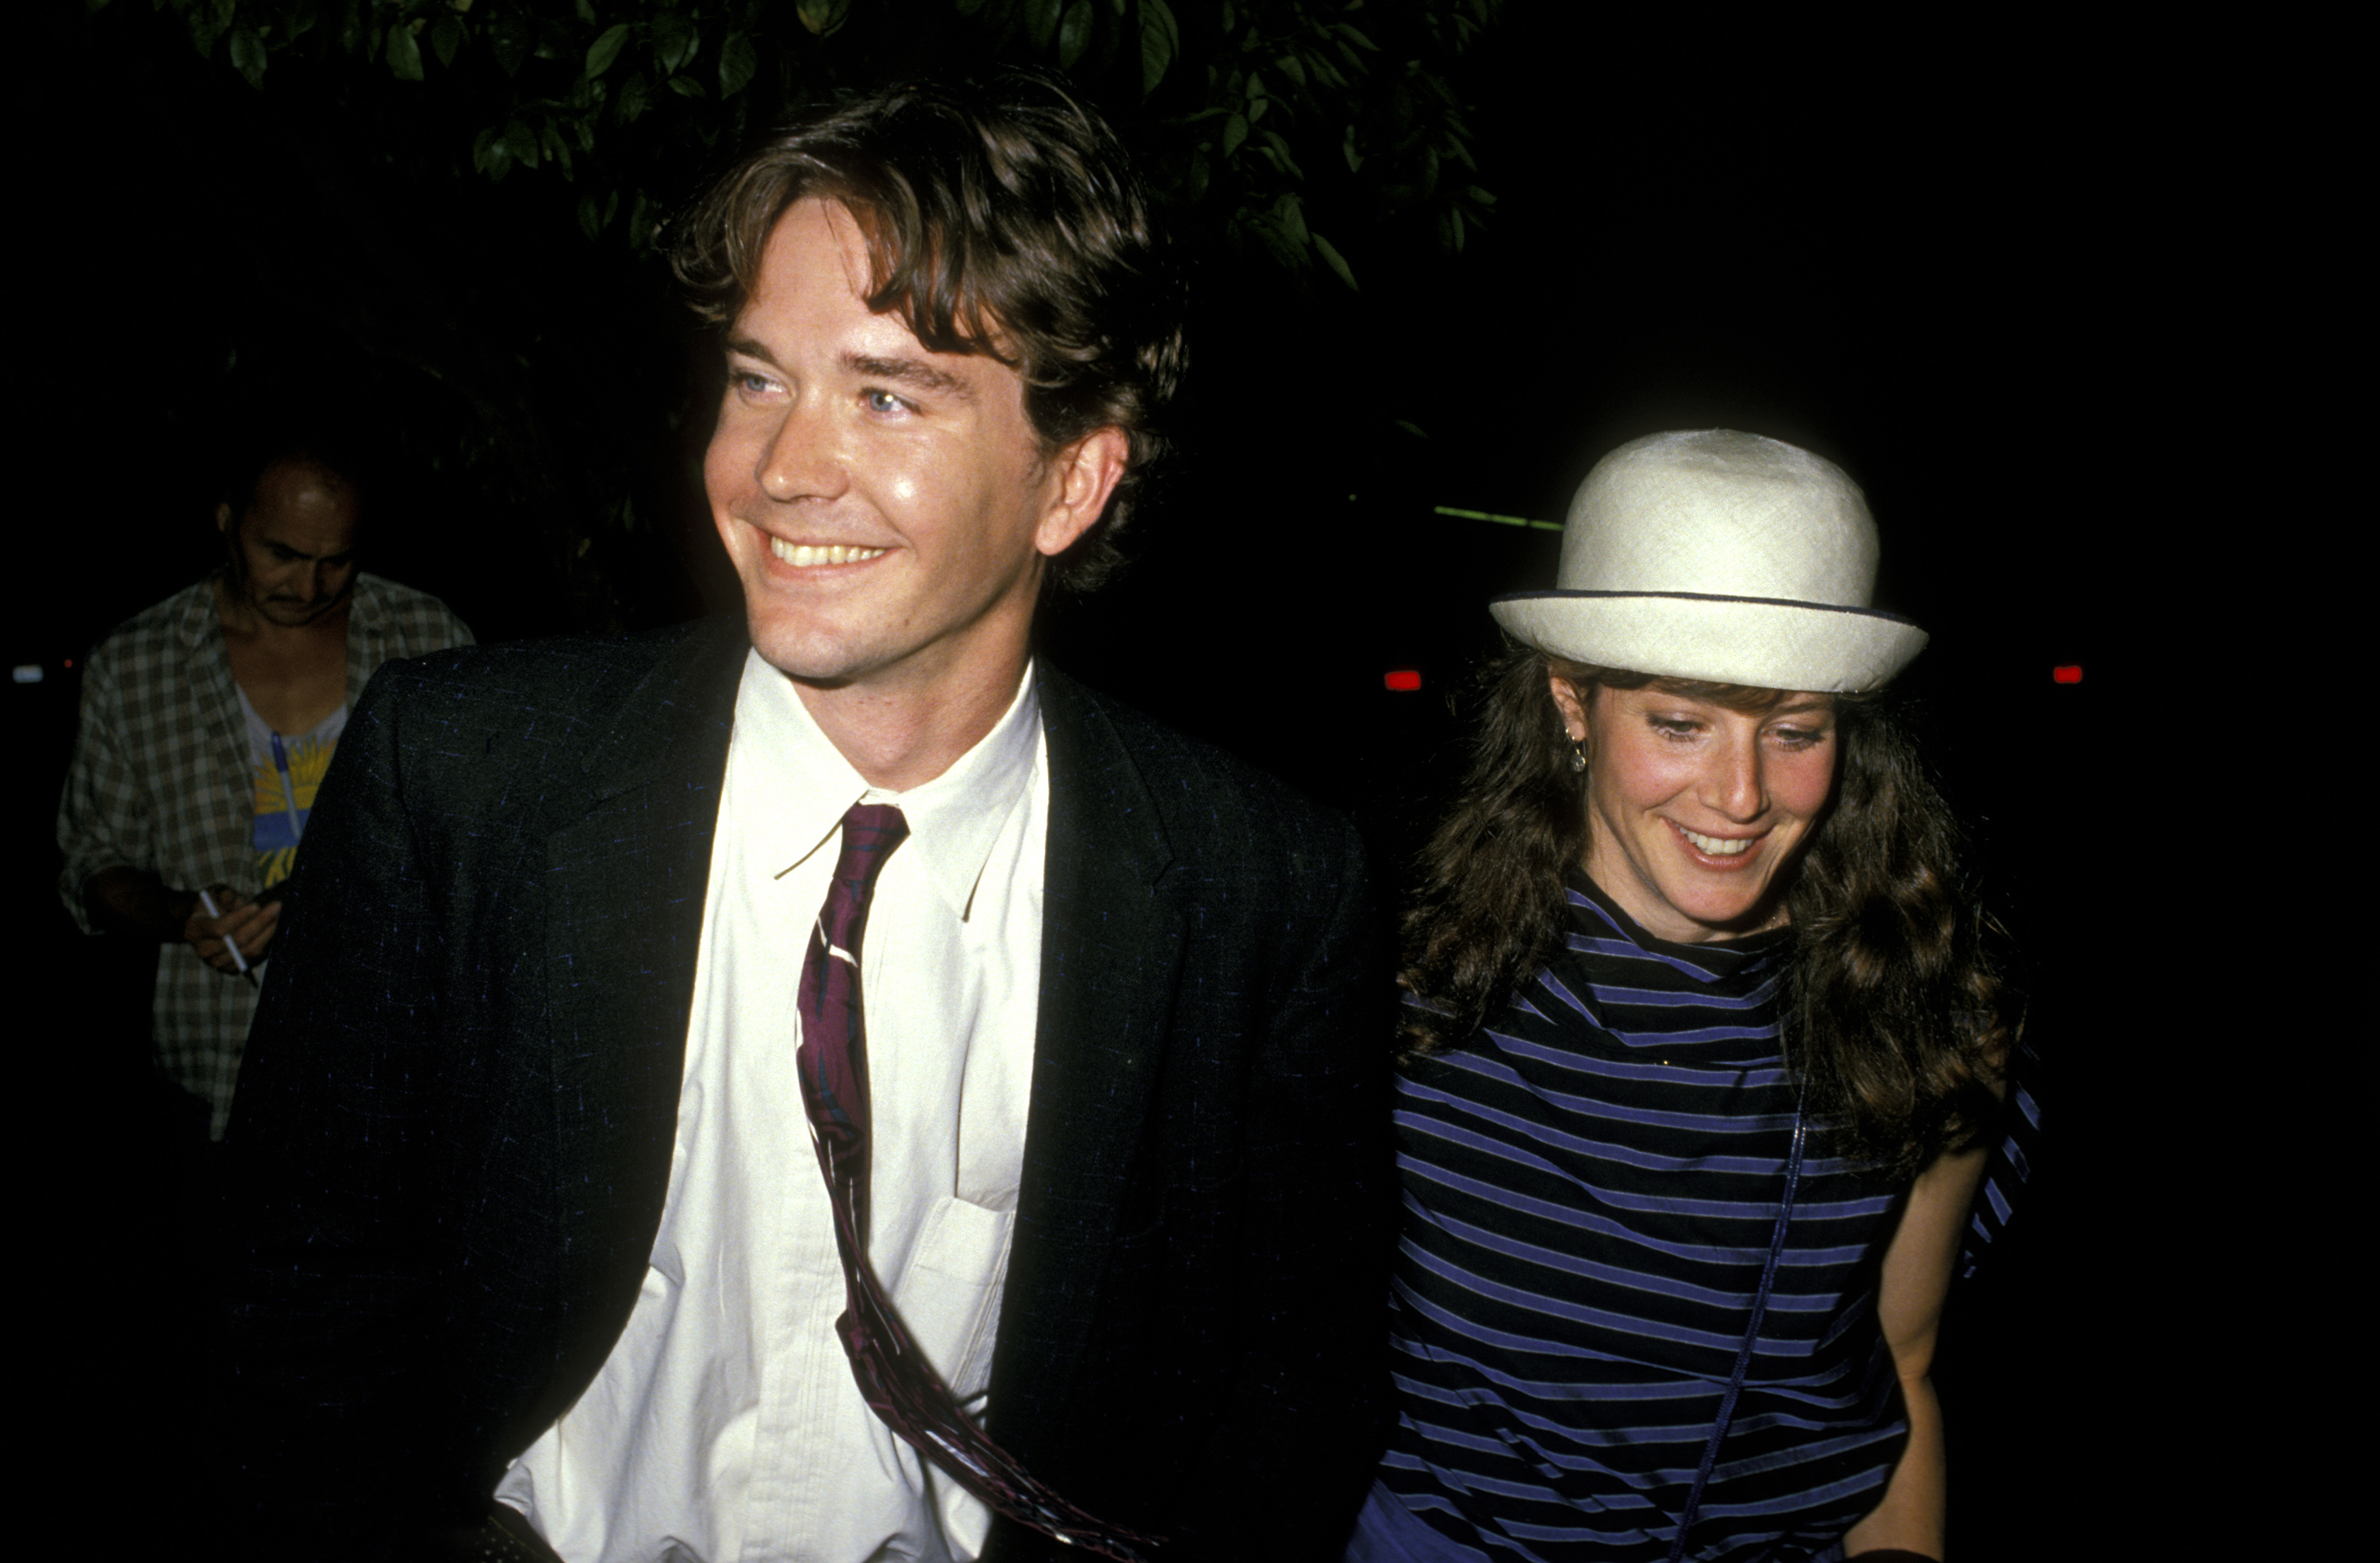 Timothy Hutton and Debra Winger at Spago's Restaurant  in 1988, in Hollywood, California, | Source: Getty Images